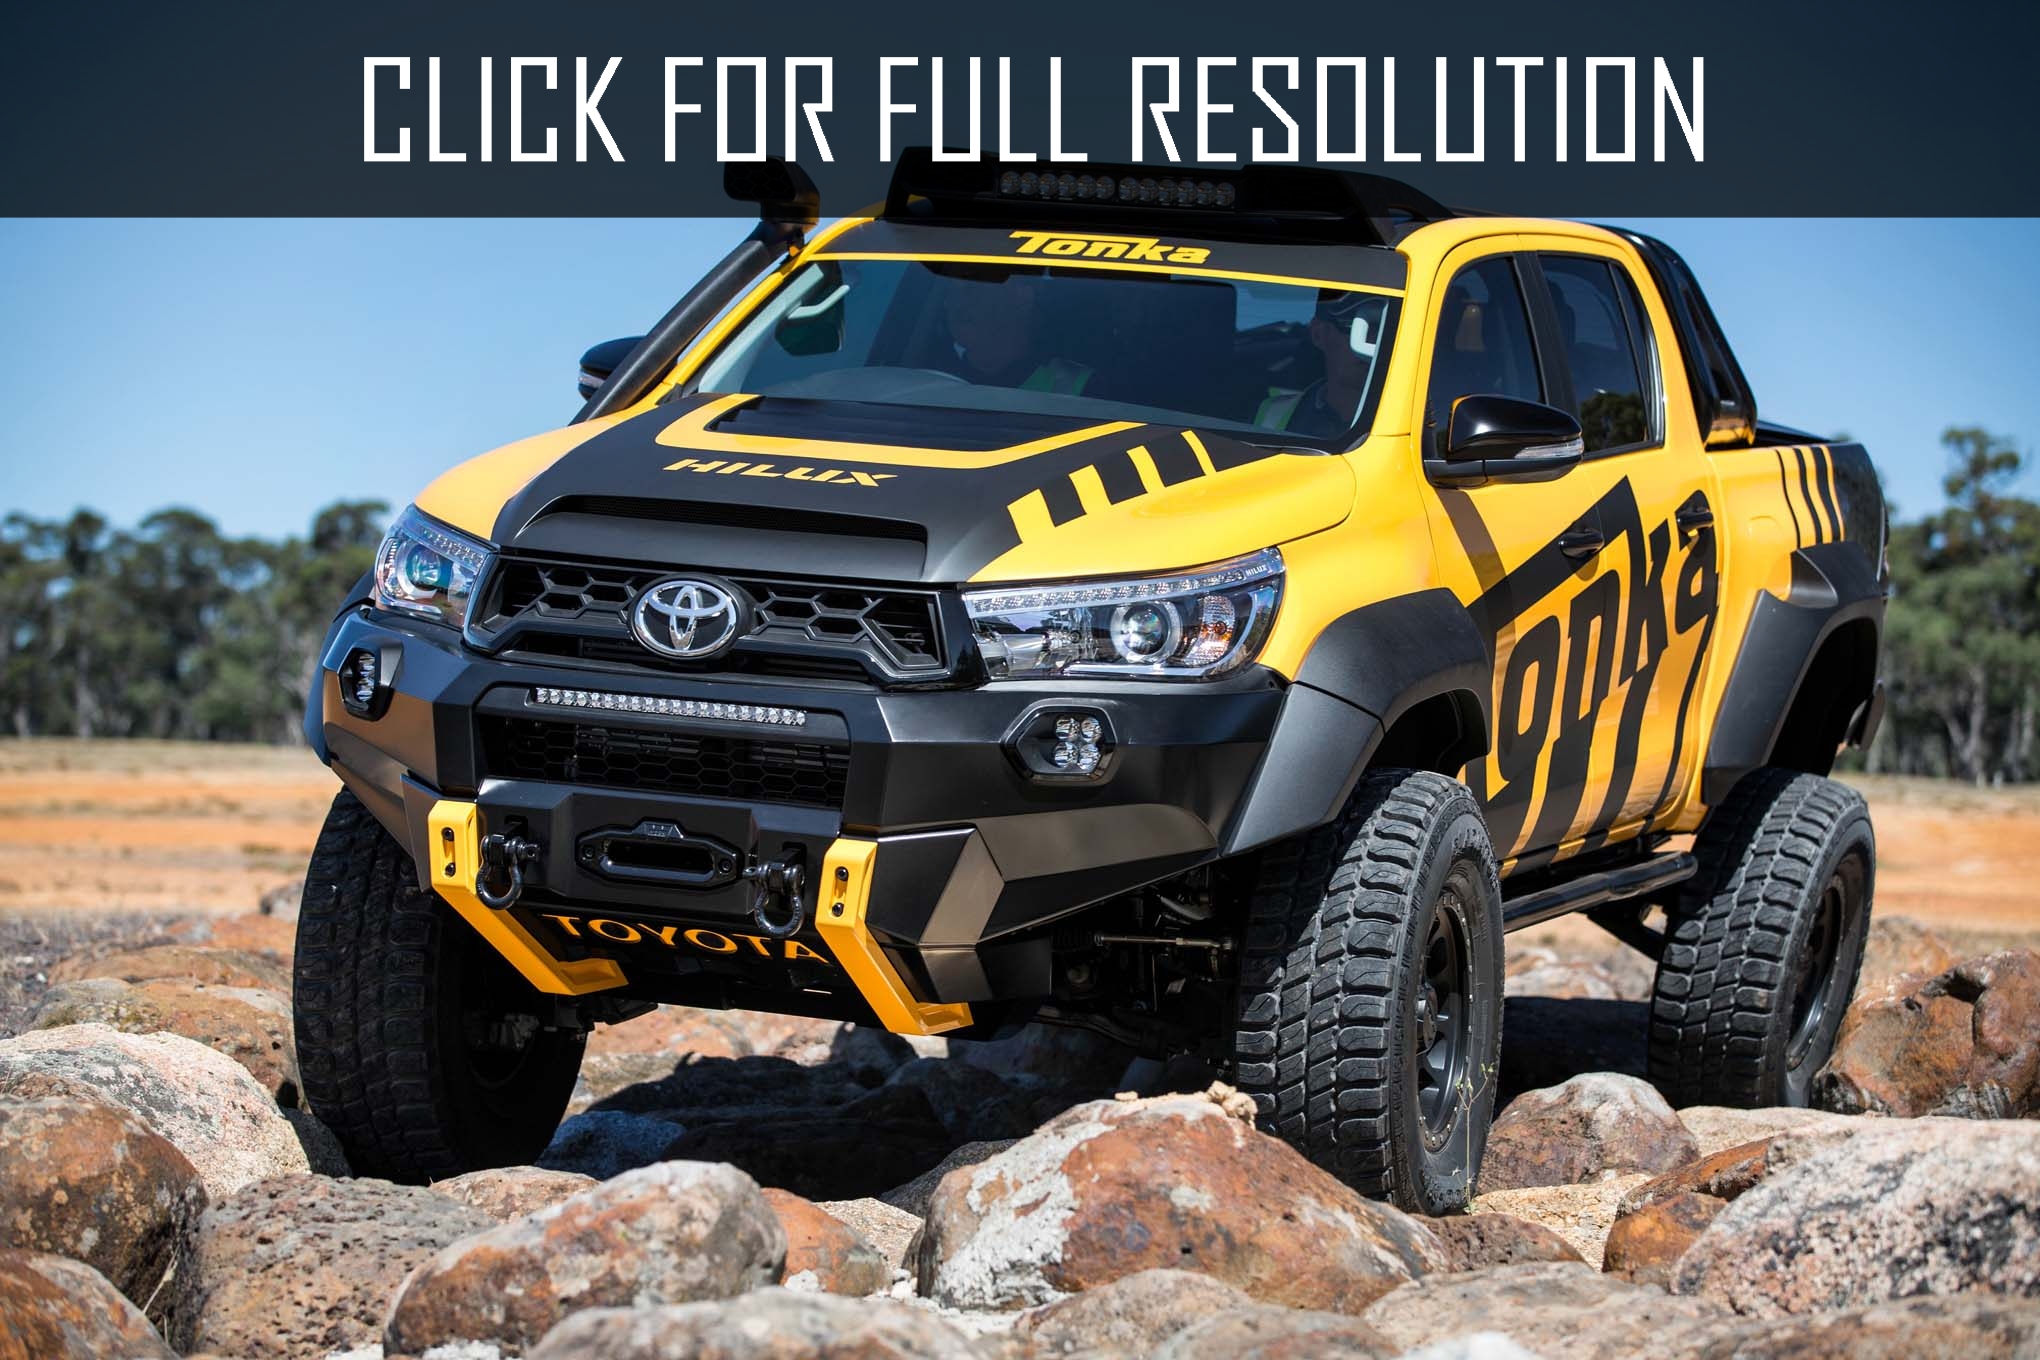 Toyota Hilux Extreme